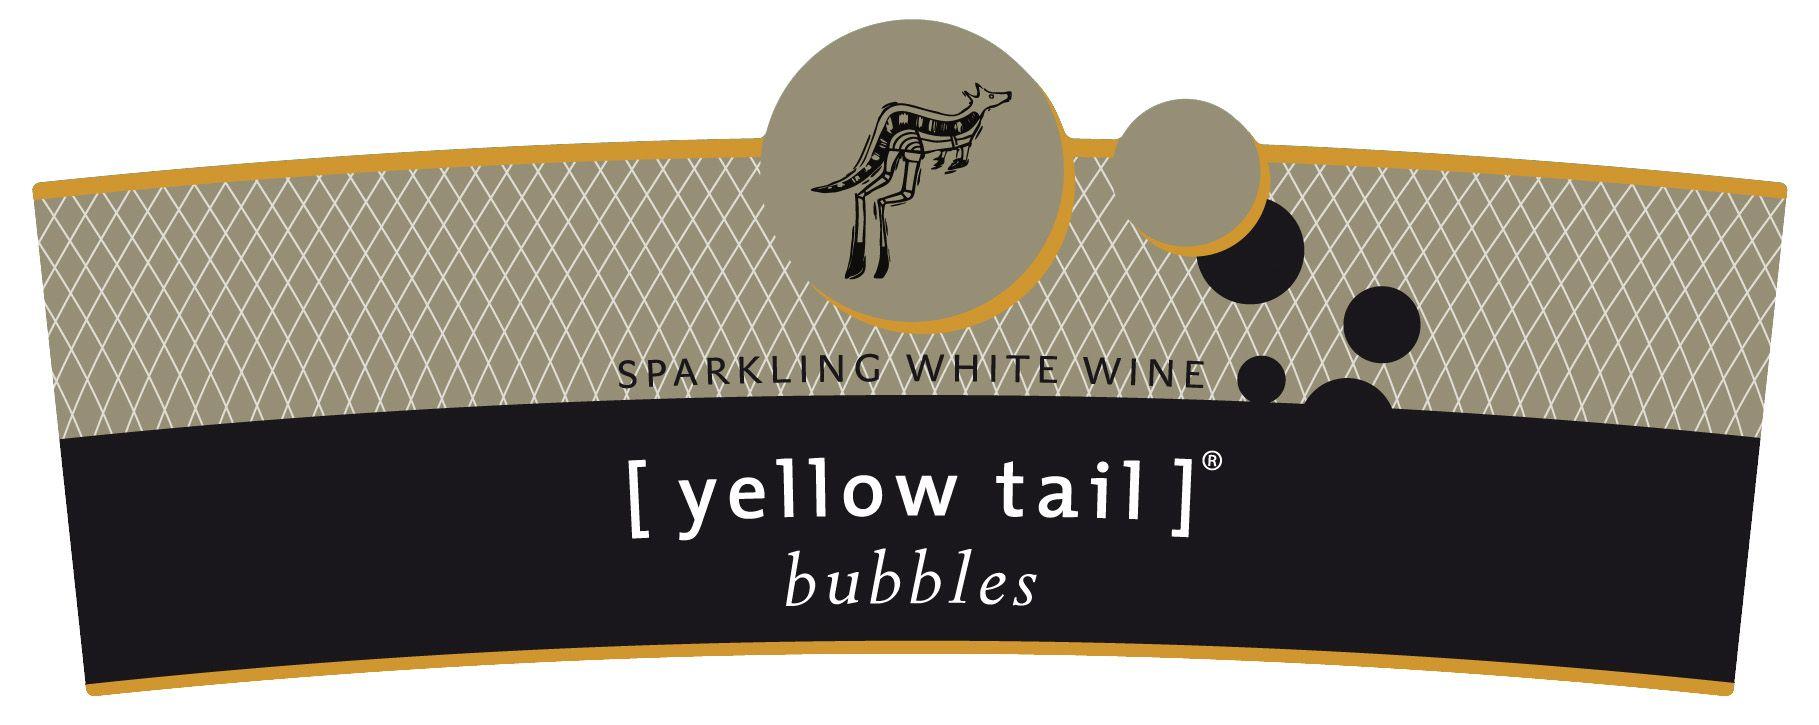 Yellow Tail Logo - yellow tail ® Bubbles Wines. Retailers. Download. High Resolution